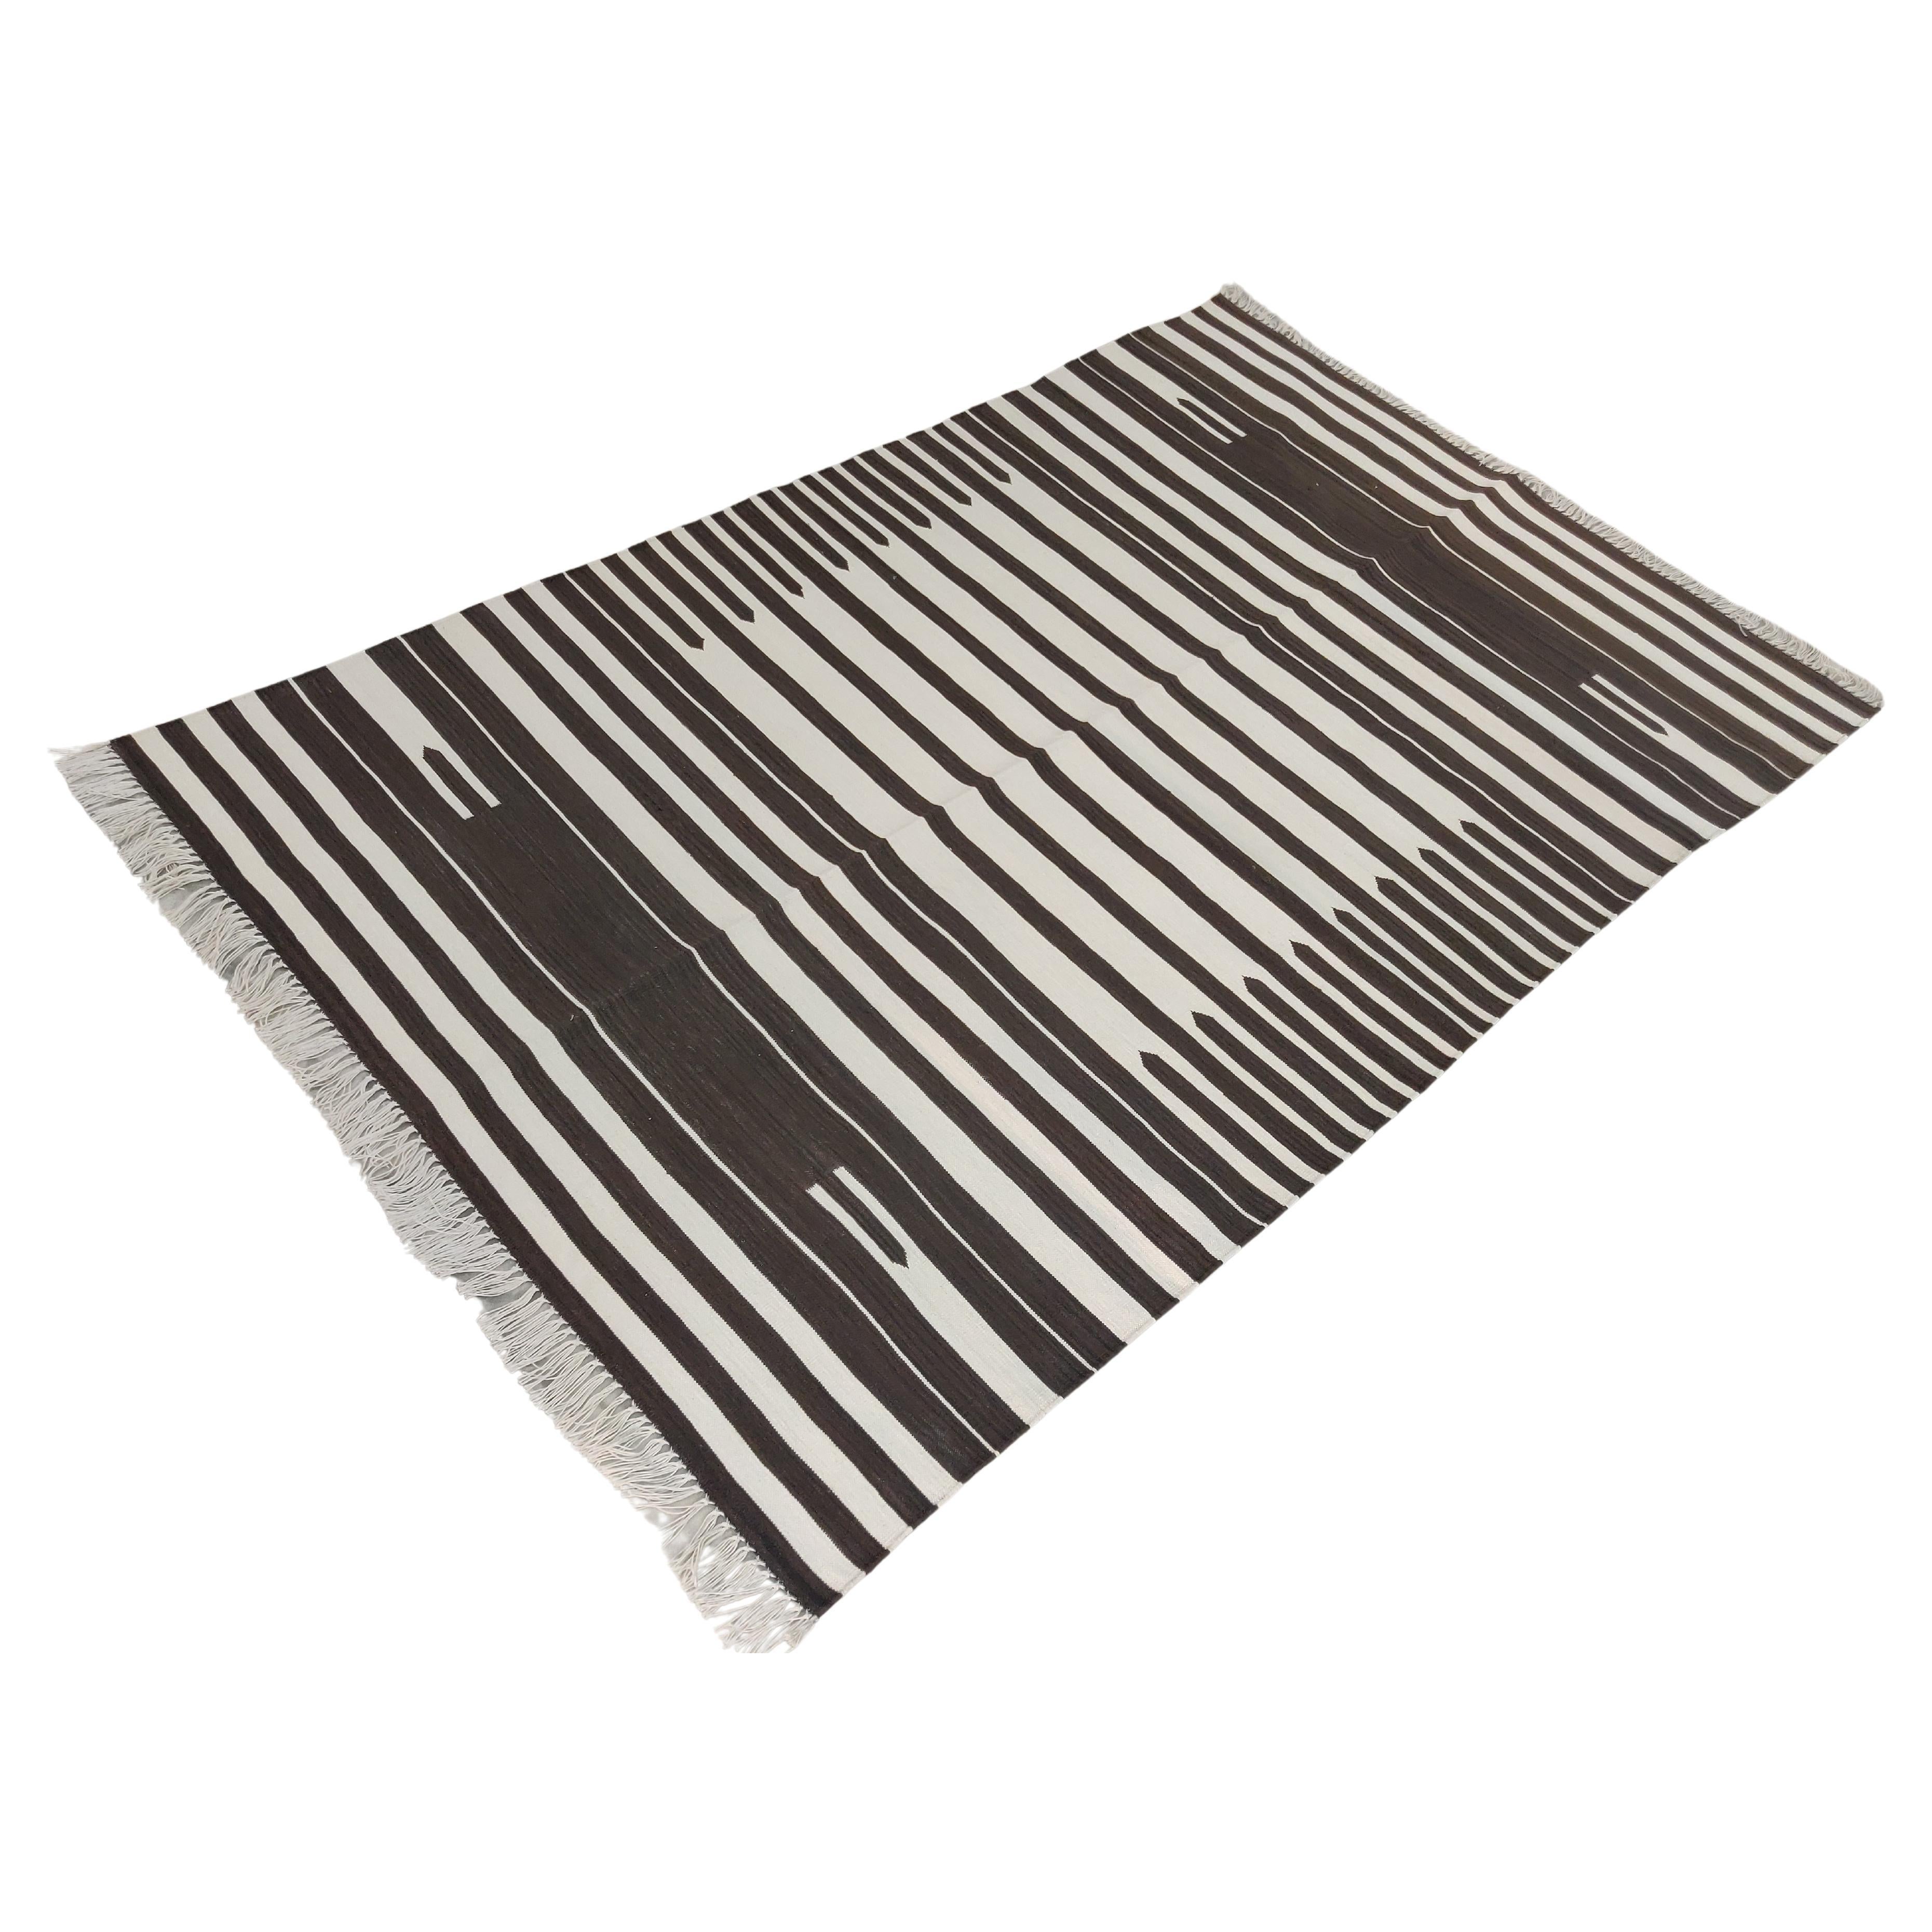 Handmade Cotton Area Flat Weave Rug, 4x6 Brown And White Striped Indian Dhurrie For Sale